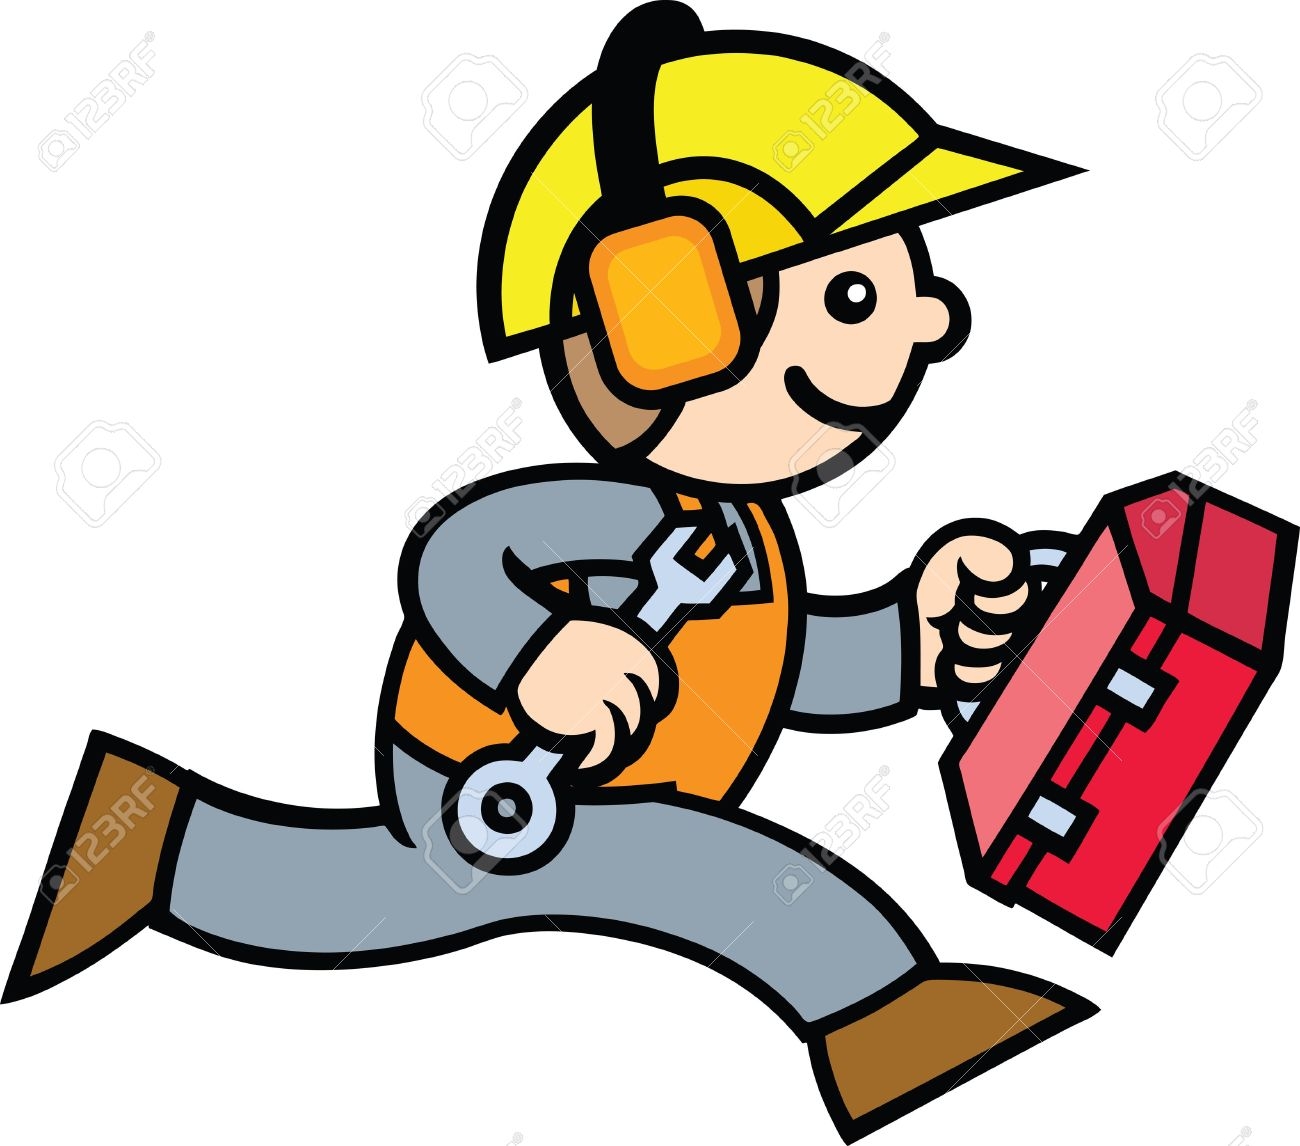 Animated construction worker.